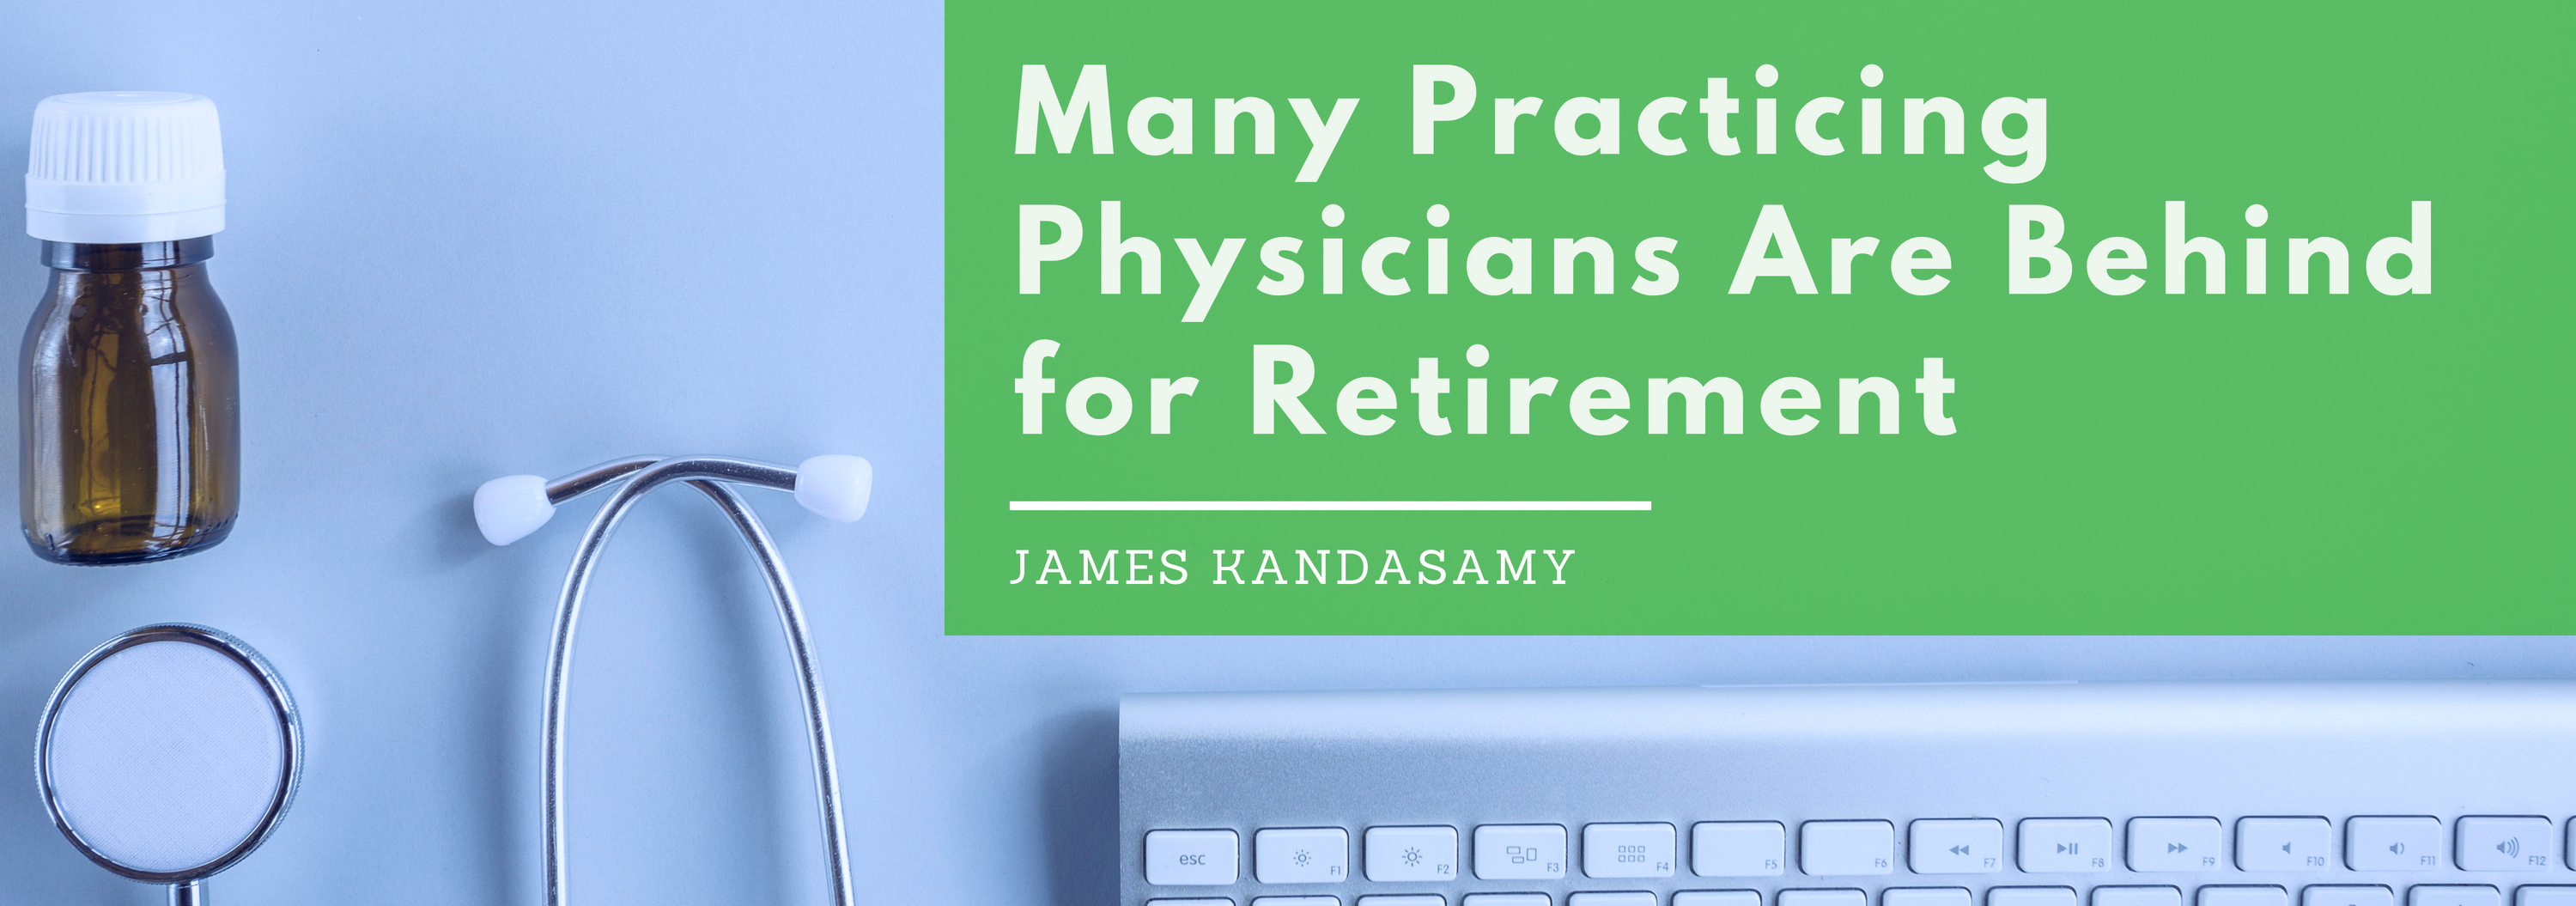 many practicing physicians are behind for retirement